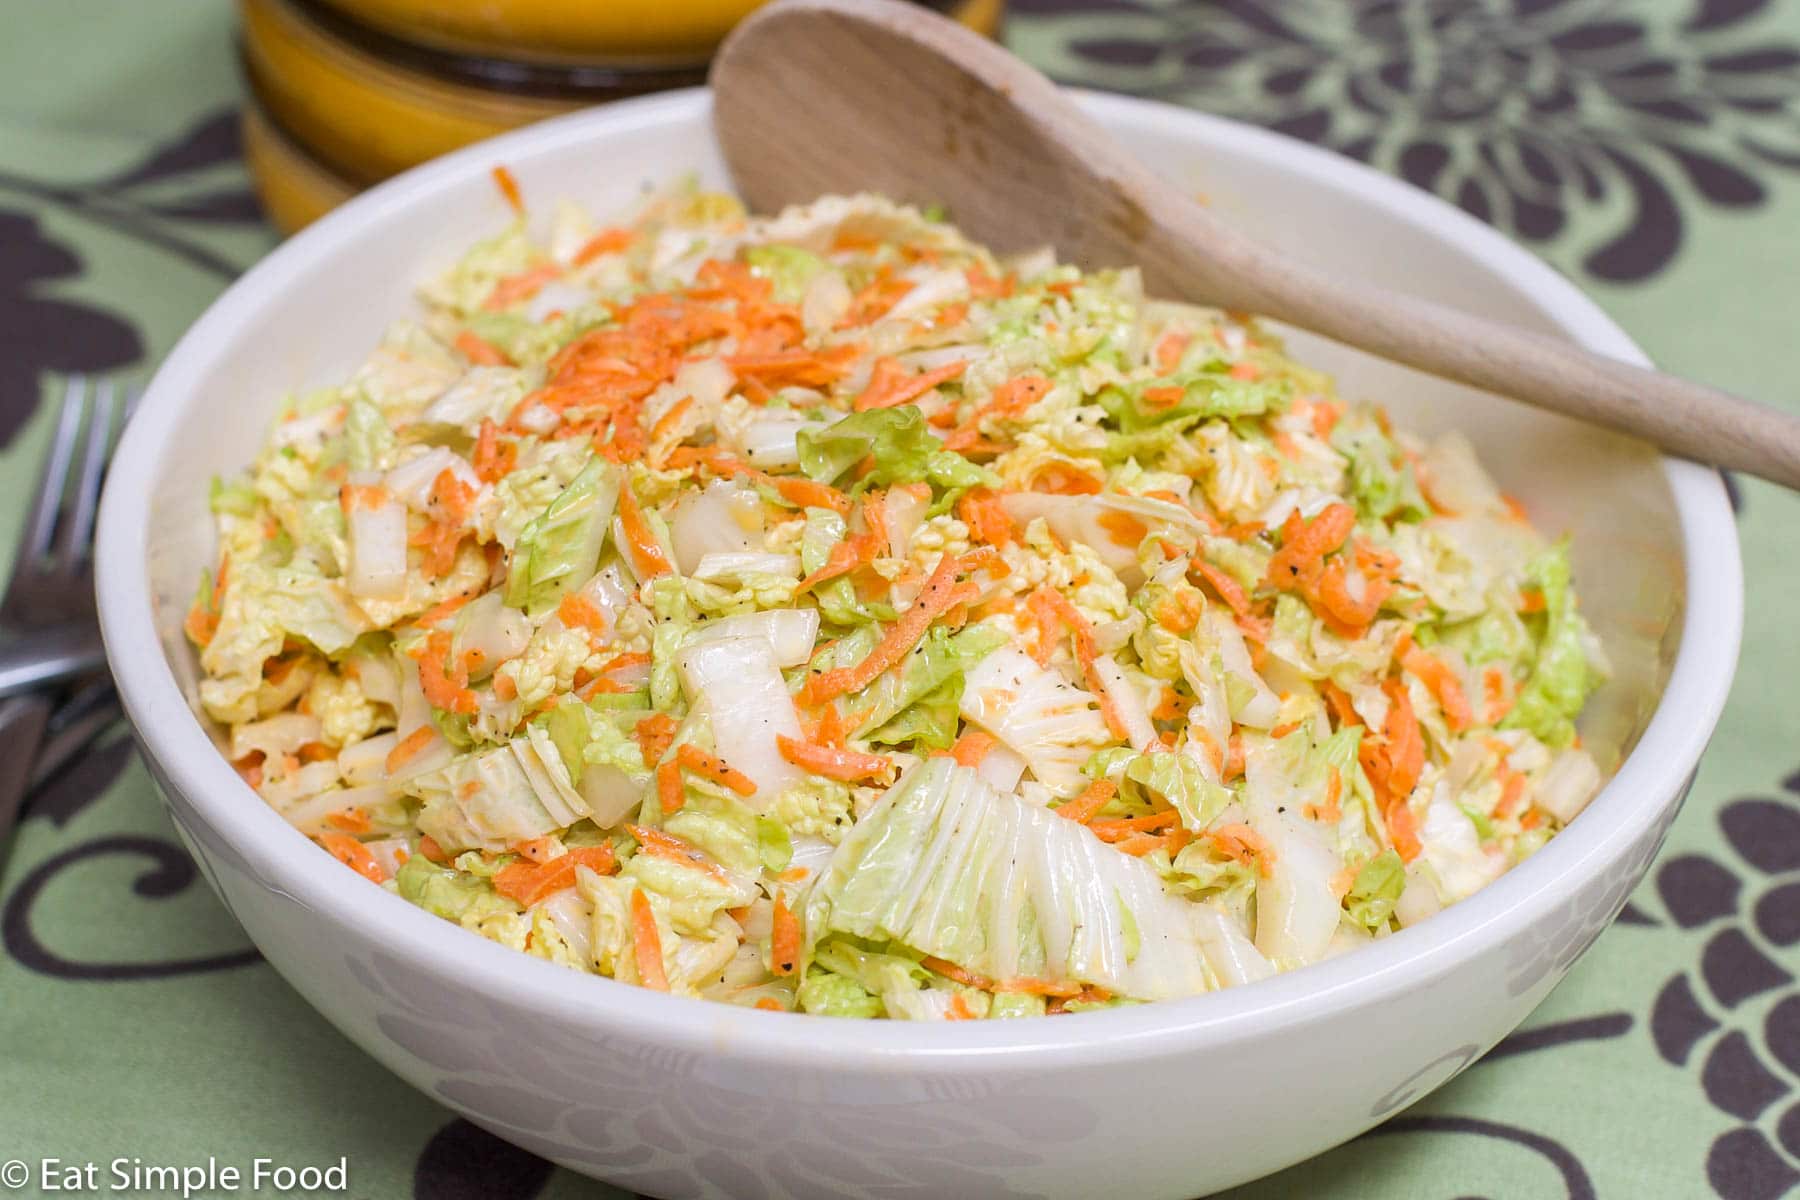 Side view of a bowl of cole slaw: cabbage and grated carrots in a white bowl with a large wood spoon.